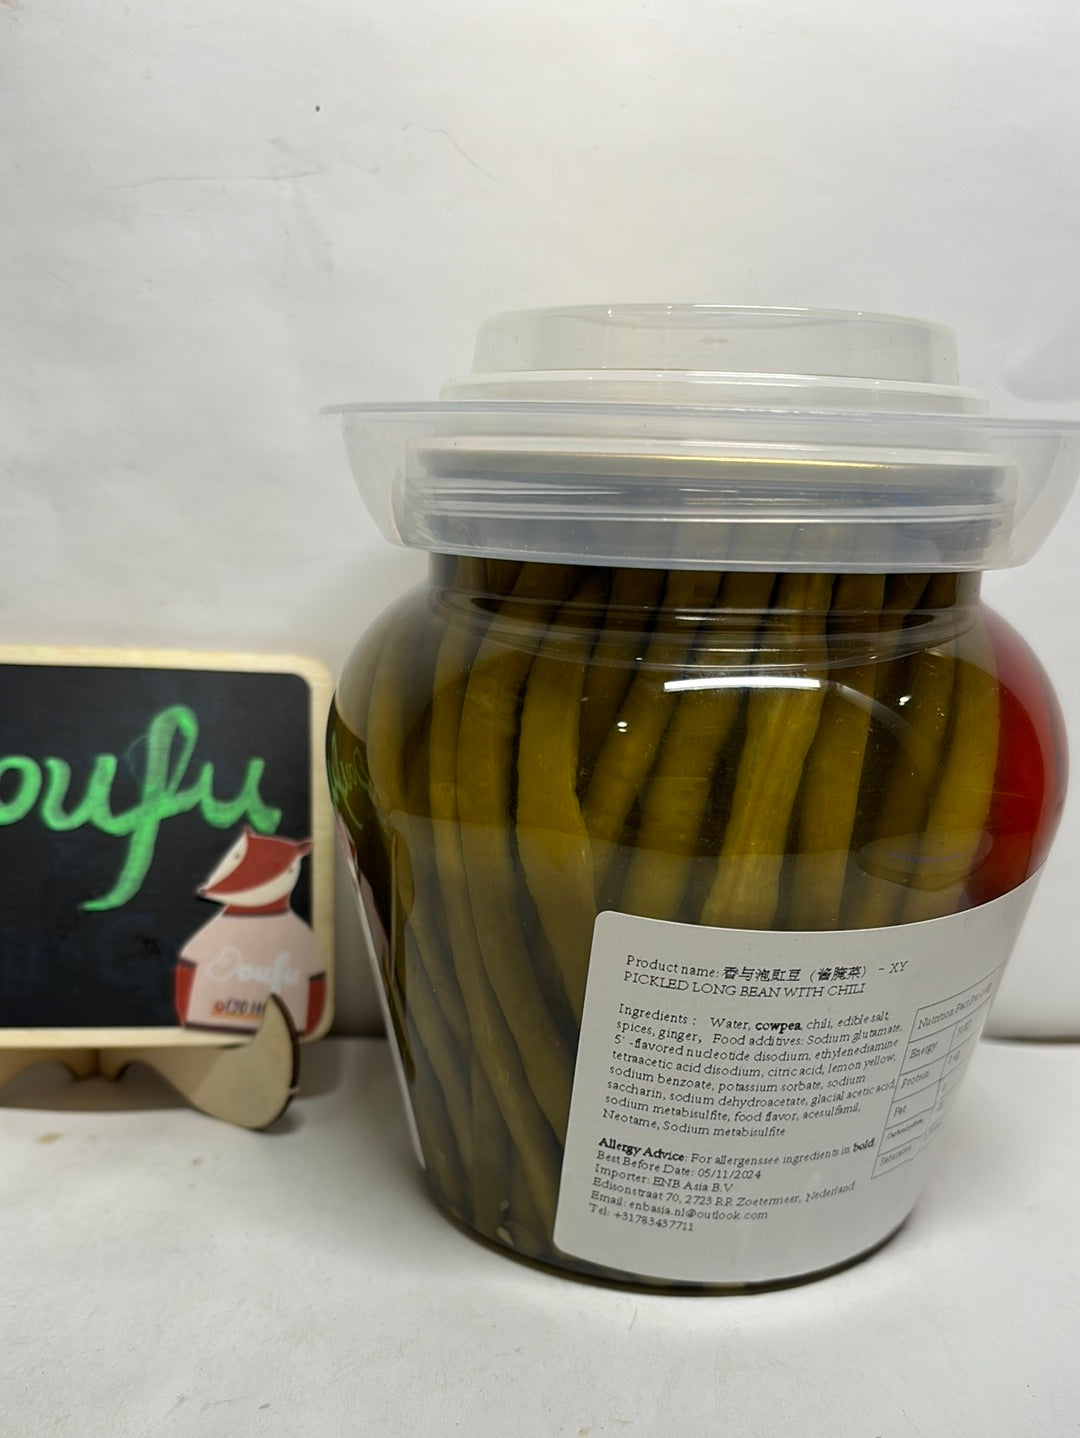 XY Pickled Long Bean with Chili XY Pickled Long Bean with Chili 香与泡豇豆 800g